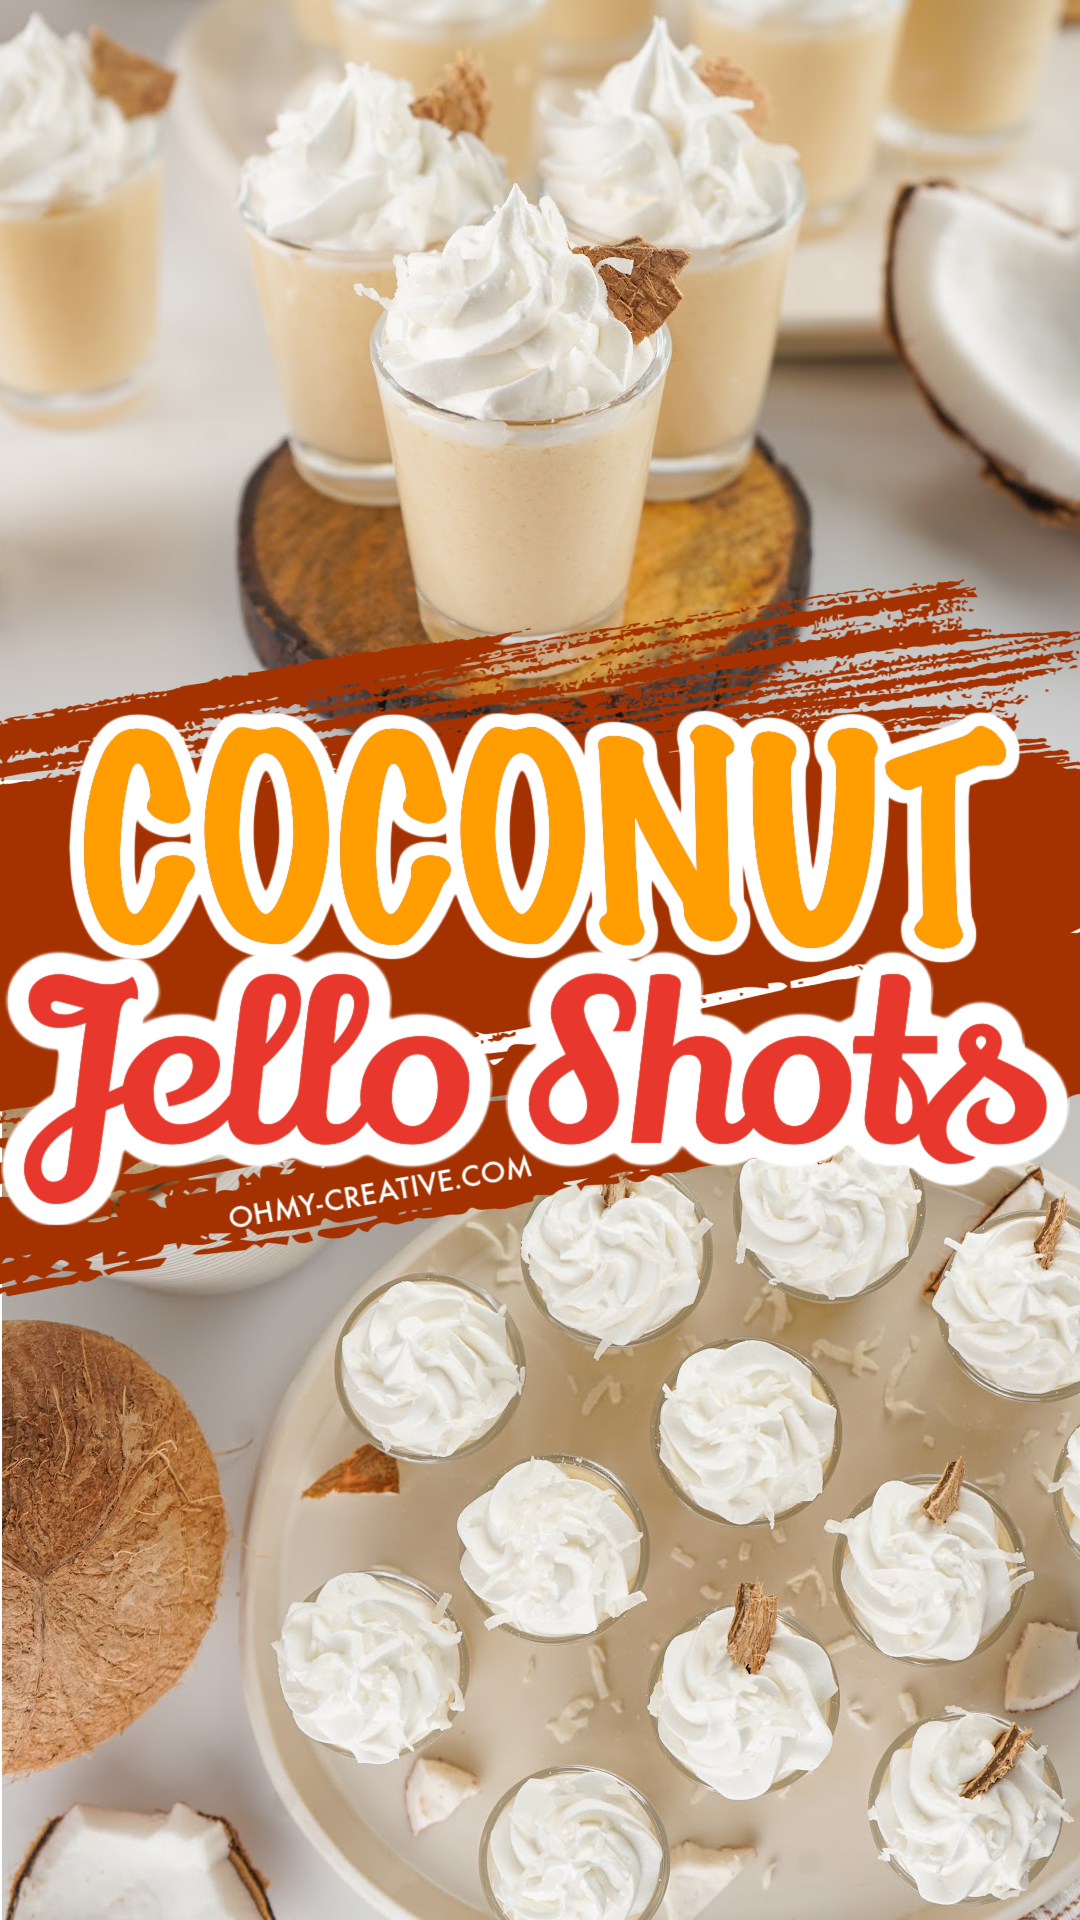 double pin image of Coconut jello shots topped with whipped cream in tall shot glasses. one photo is looking down on the coconut shots.